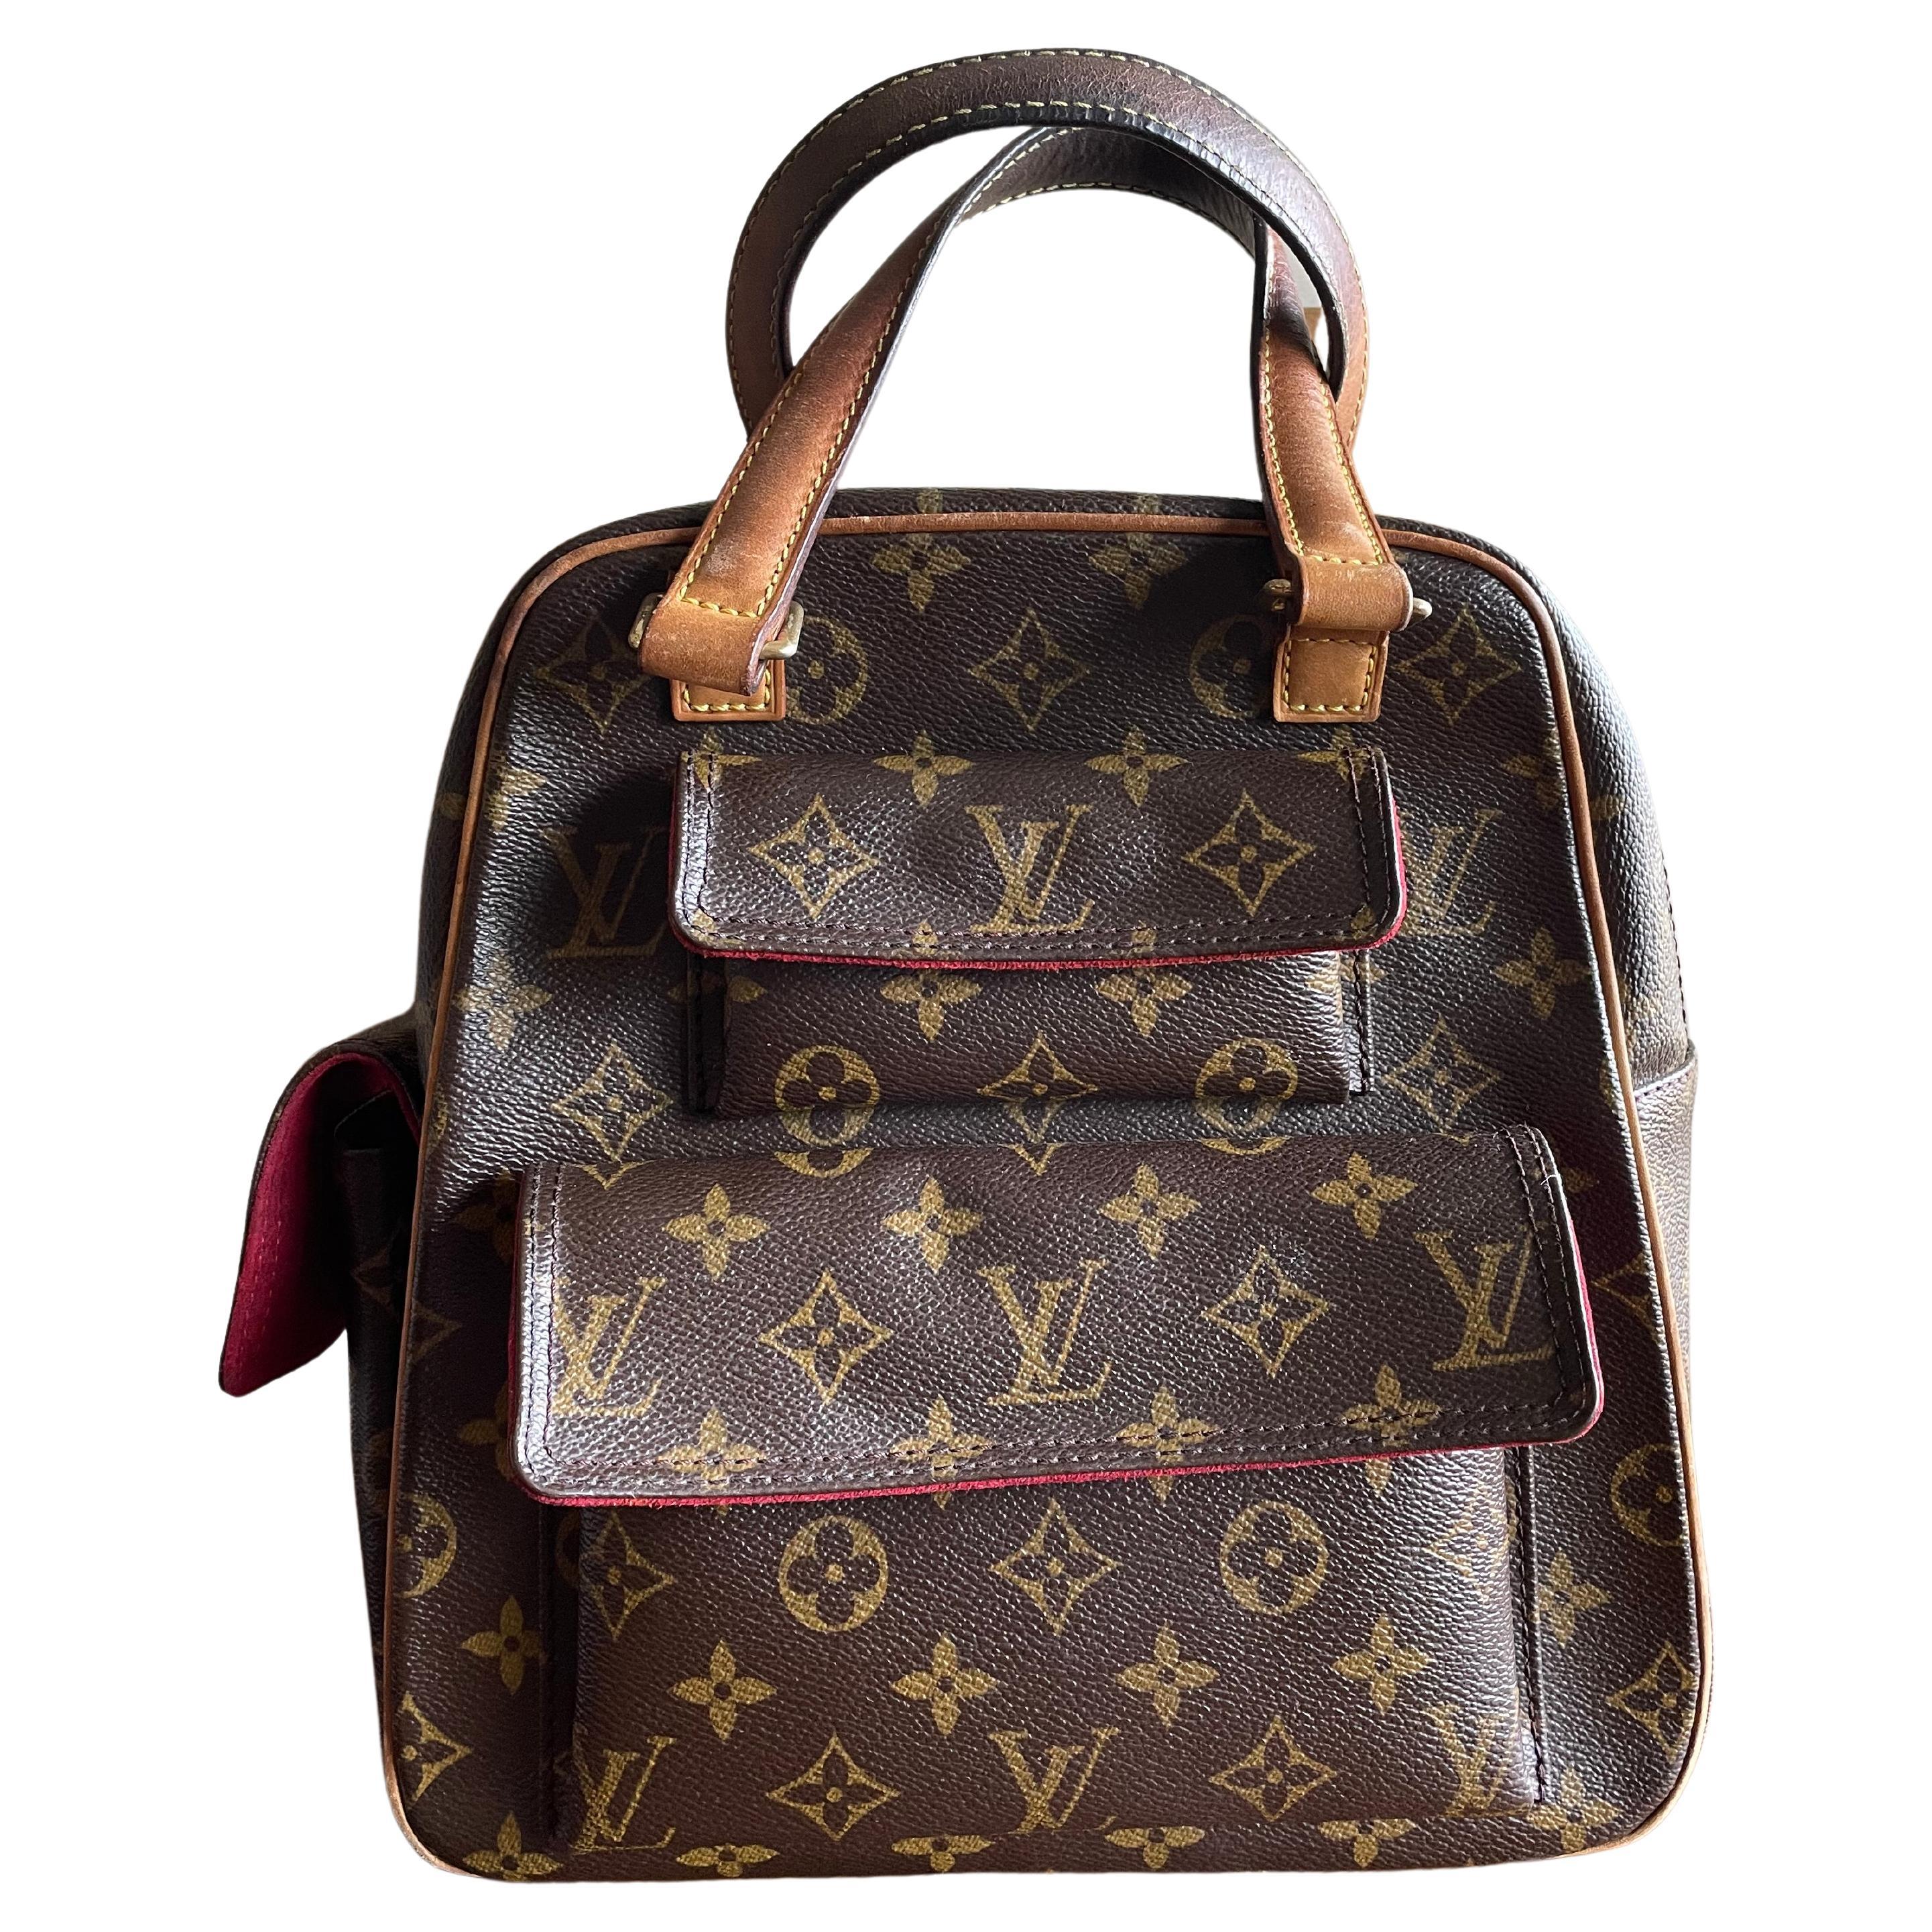 Louis Vuitton Limited Edition Bag - 222 For Sale on 1stDibs